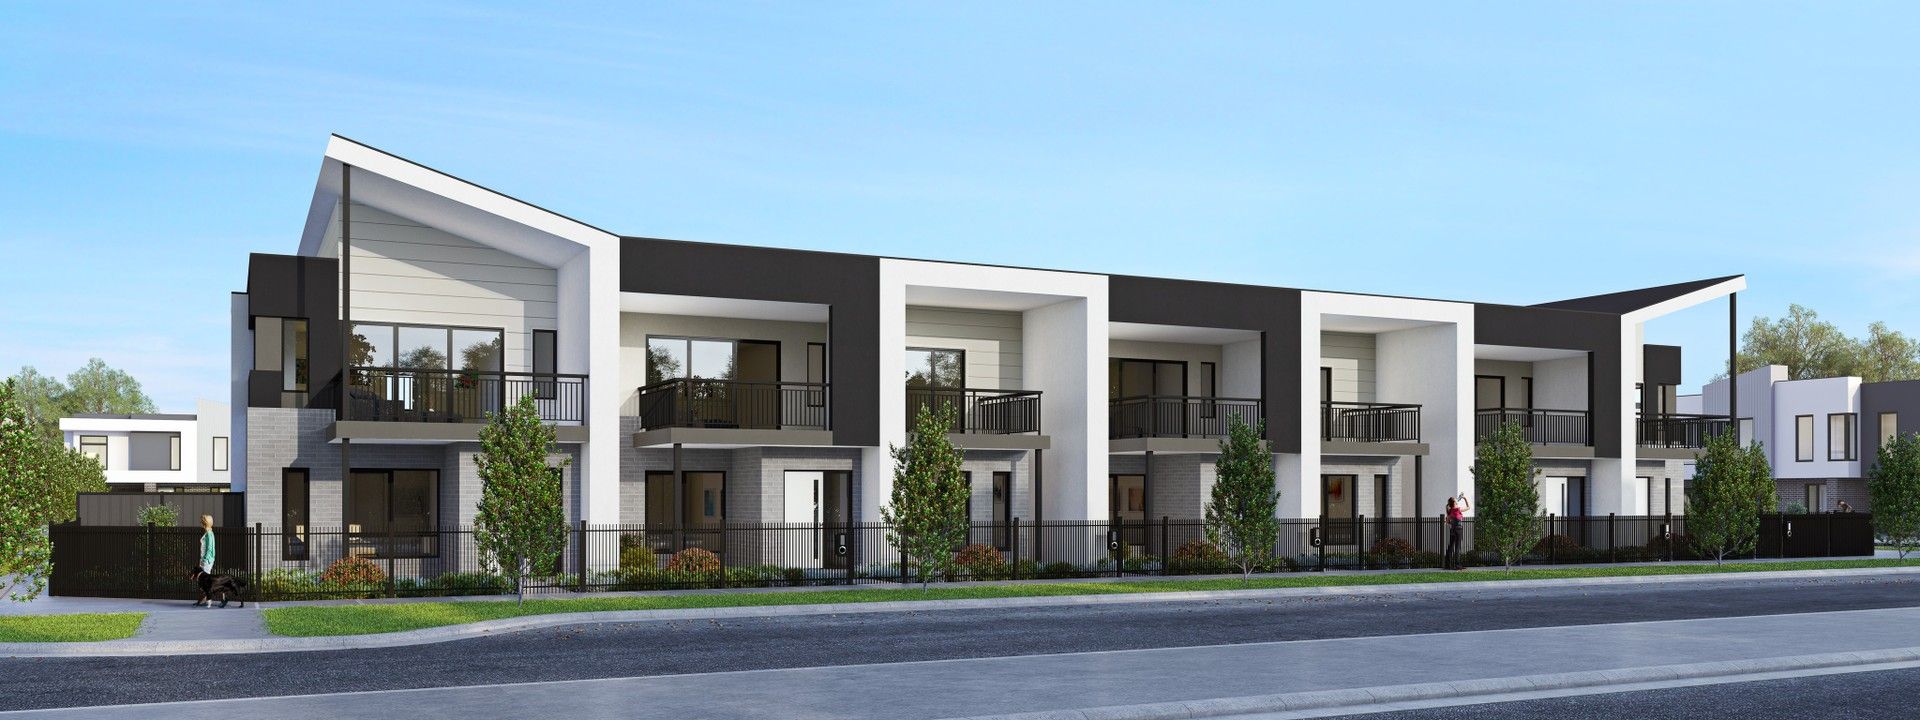 Parkville Mid Townhome by Metricon Homes, Kalkallo VIC 3064, Image 2